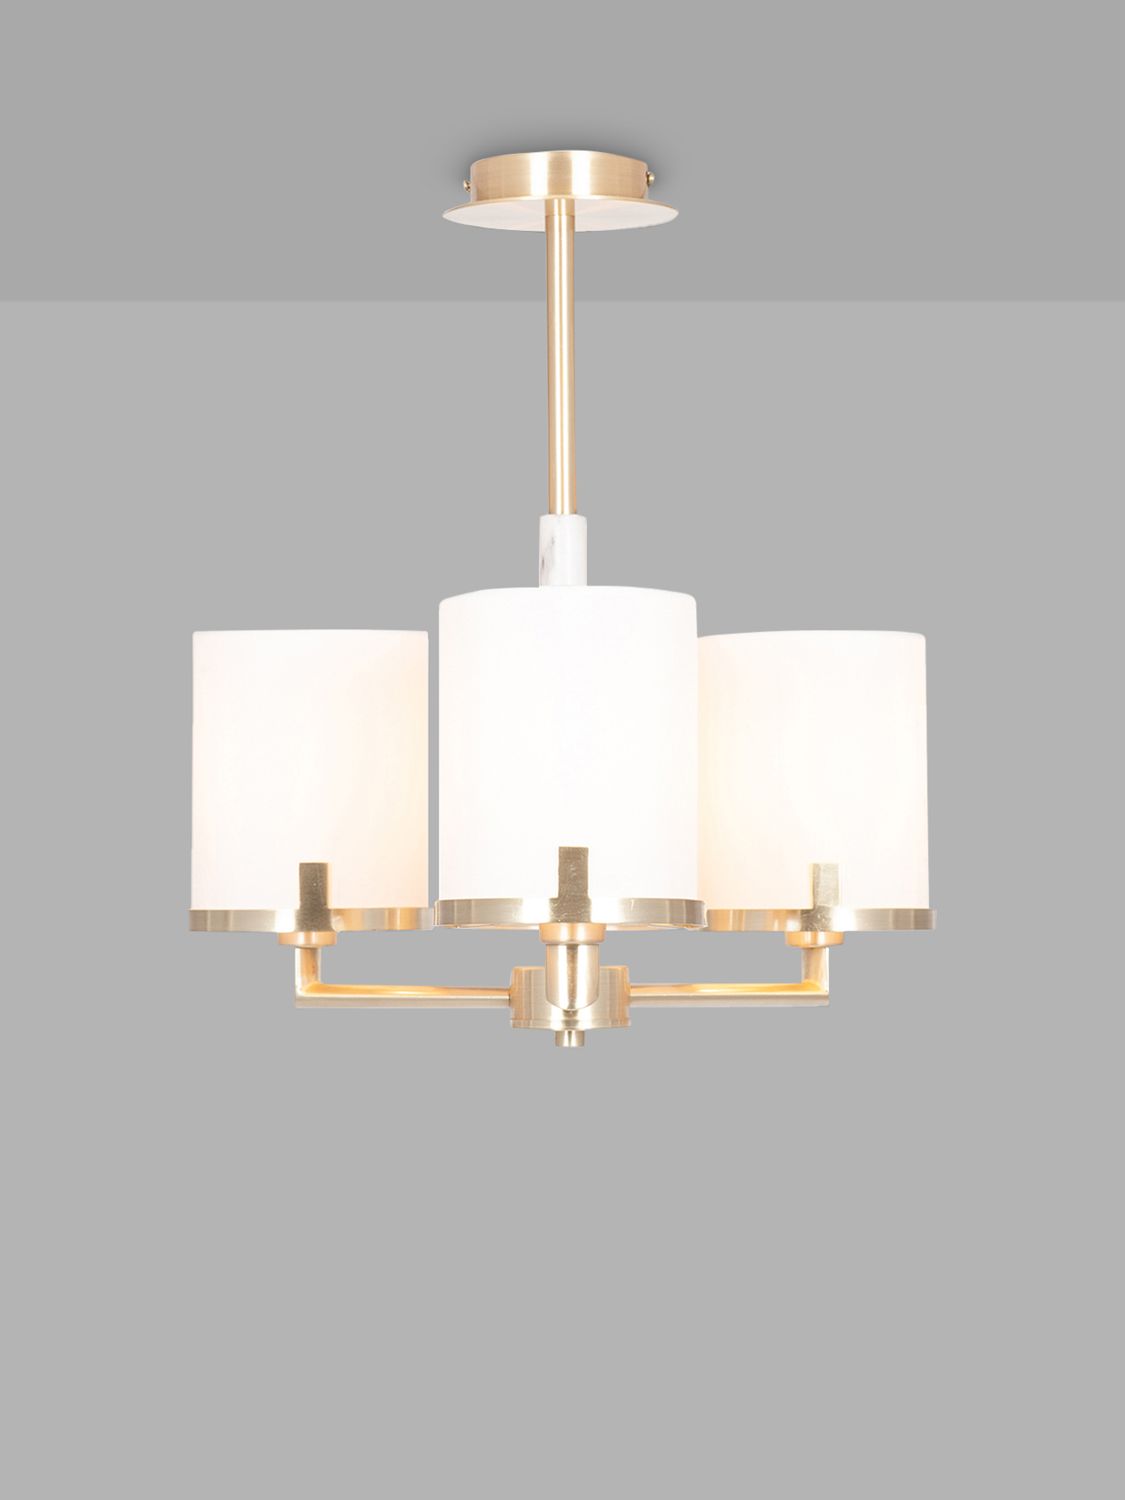 Photo of Pacific lifestyle midland 3 arm ceiling light champagne gold